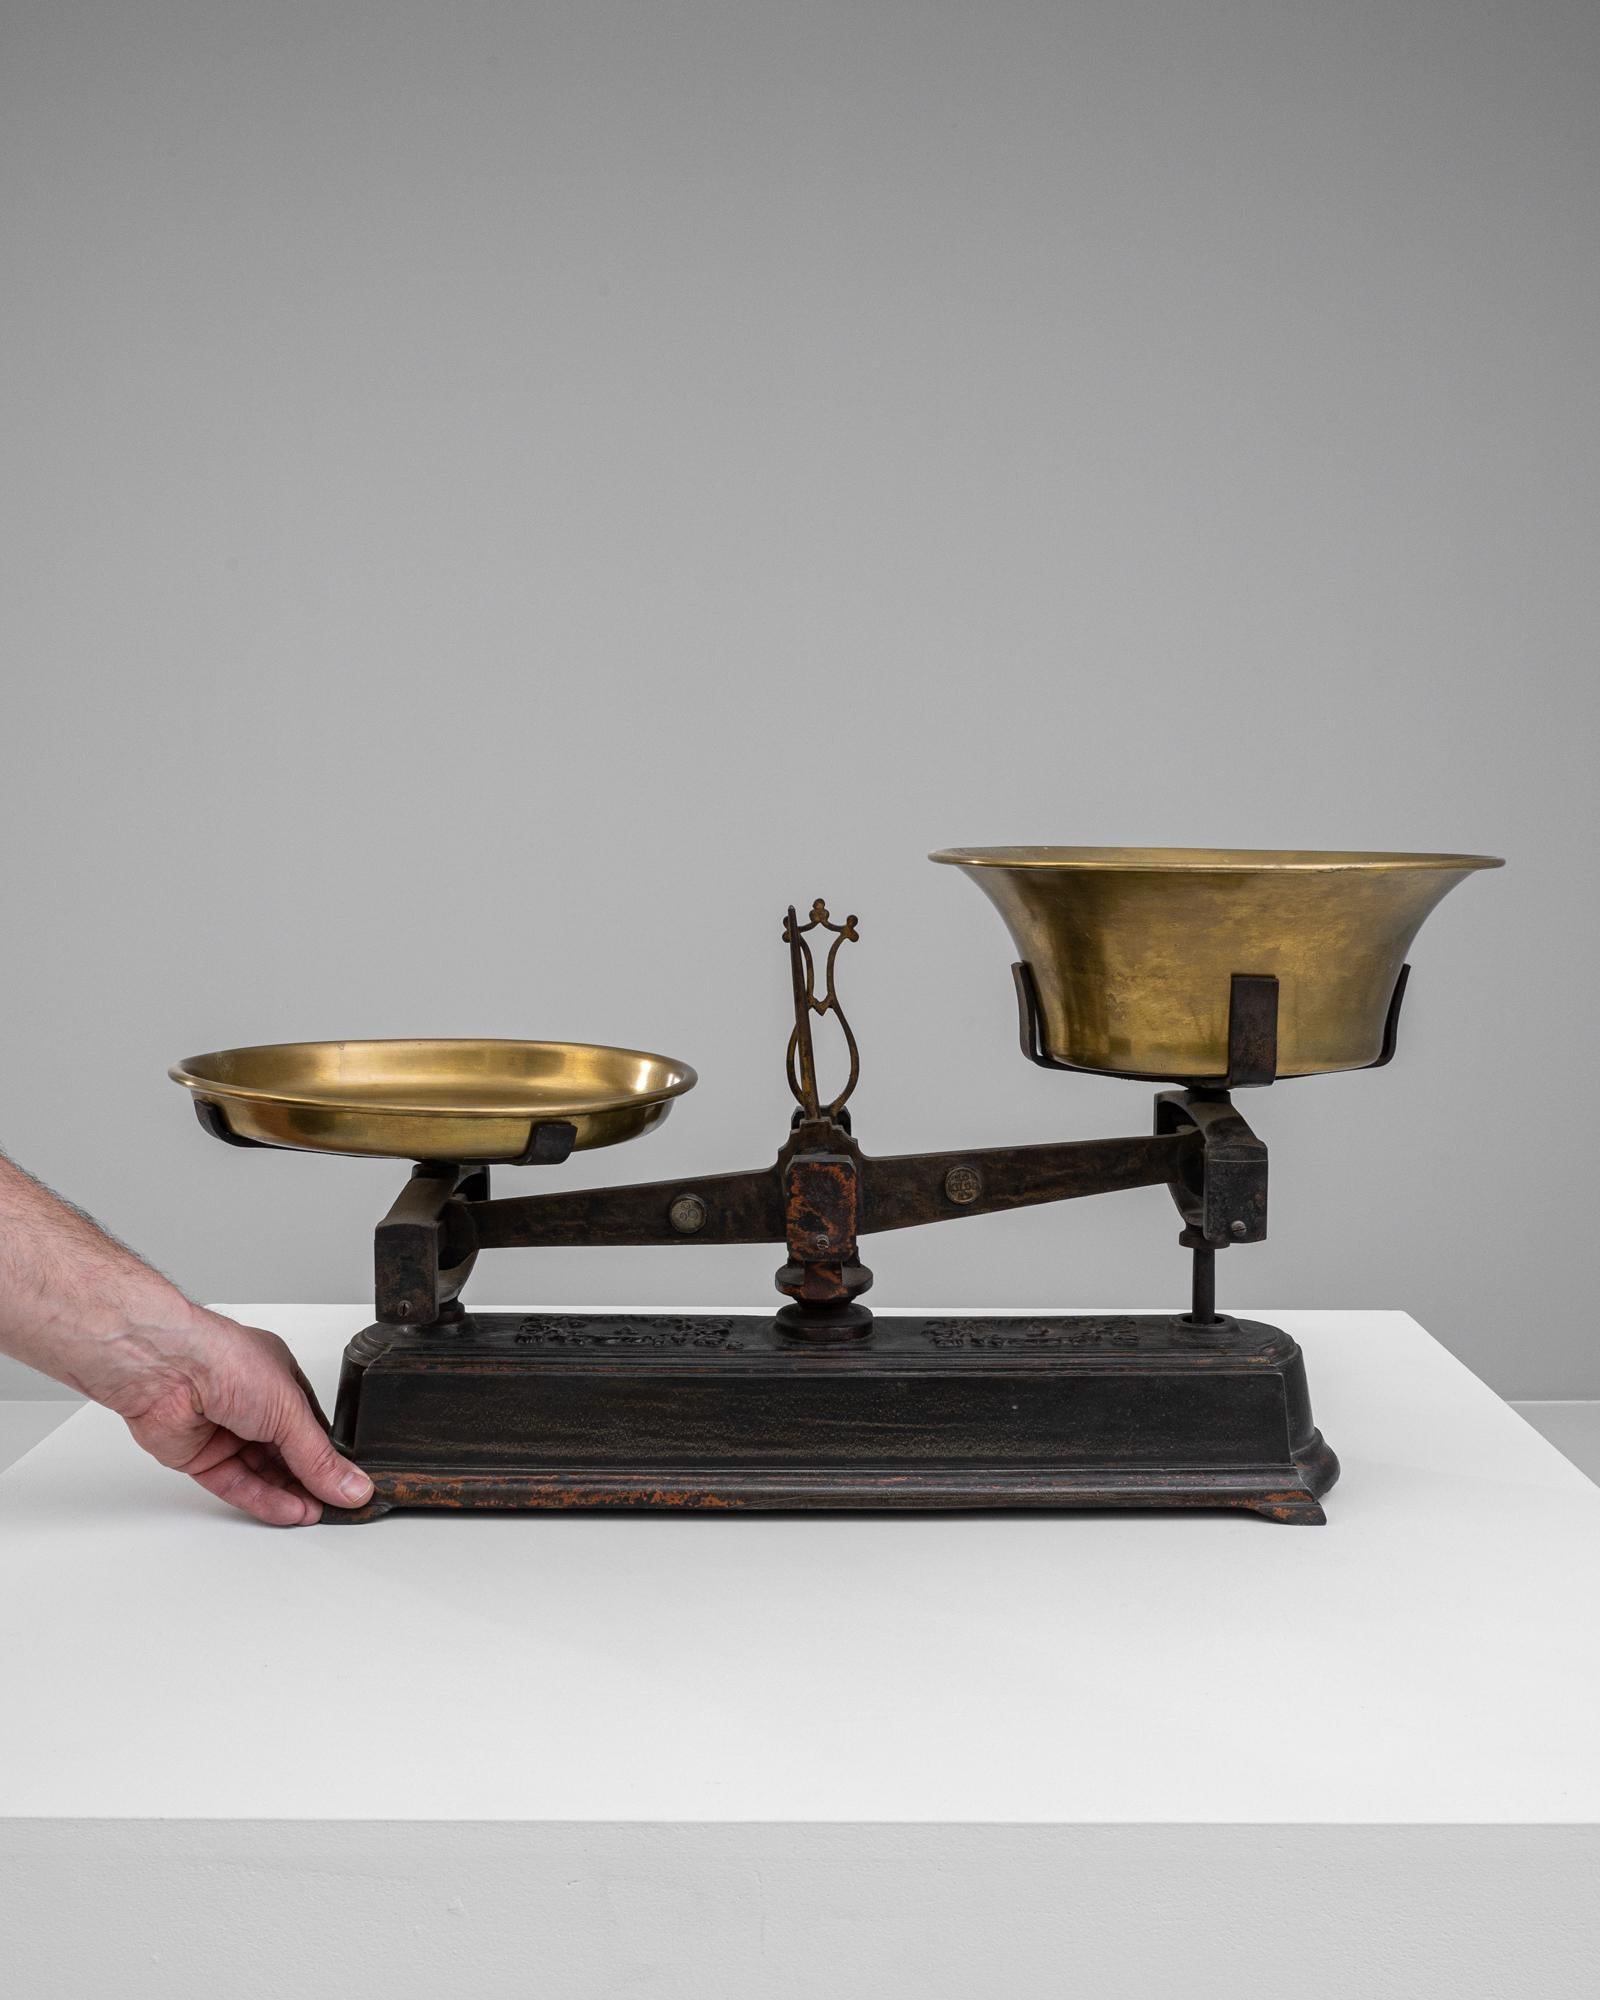 This 19th Century French Metal Scale is a splendid example of historical craftsmanship and decorative art. It features a sturdy iron base with elegant scrollwork detailing and the rich patina of age, indicating its long-standing service and